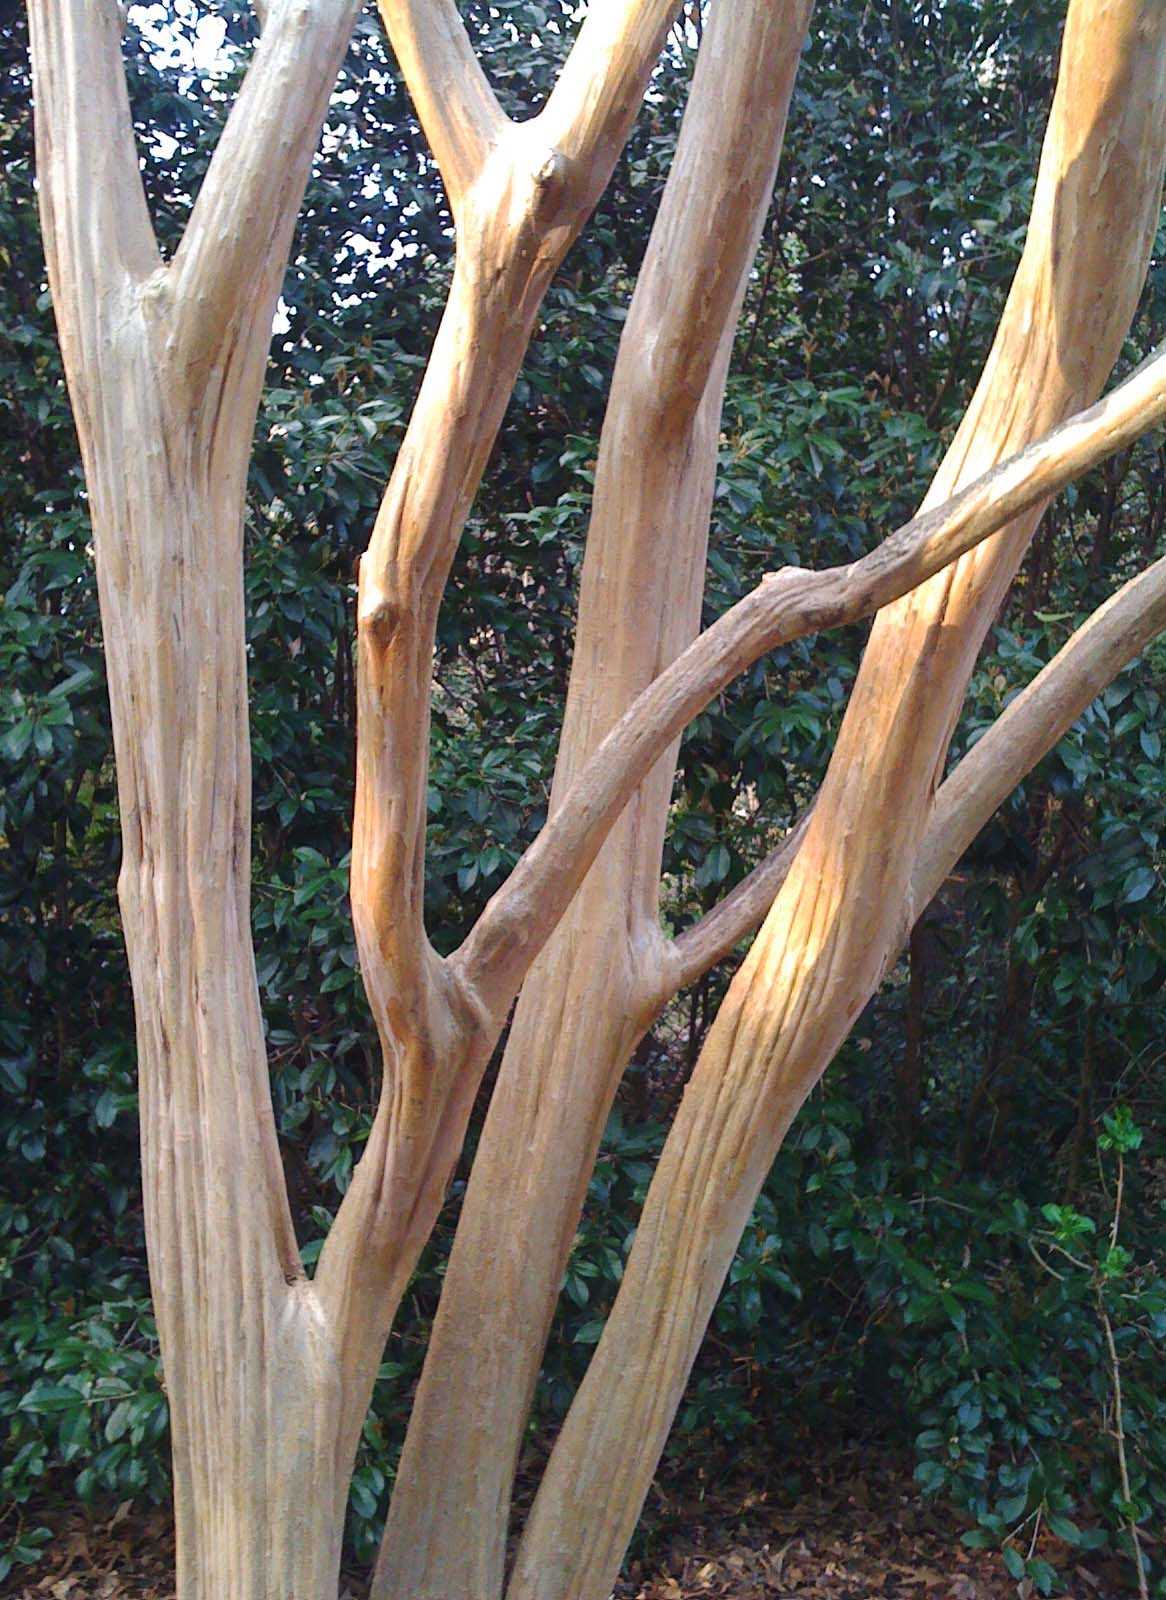 How to Prune Crepe Myrtle A Step-by-Step Guide